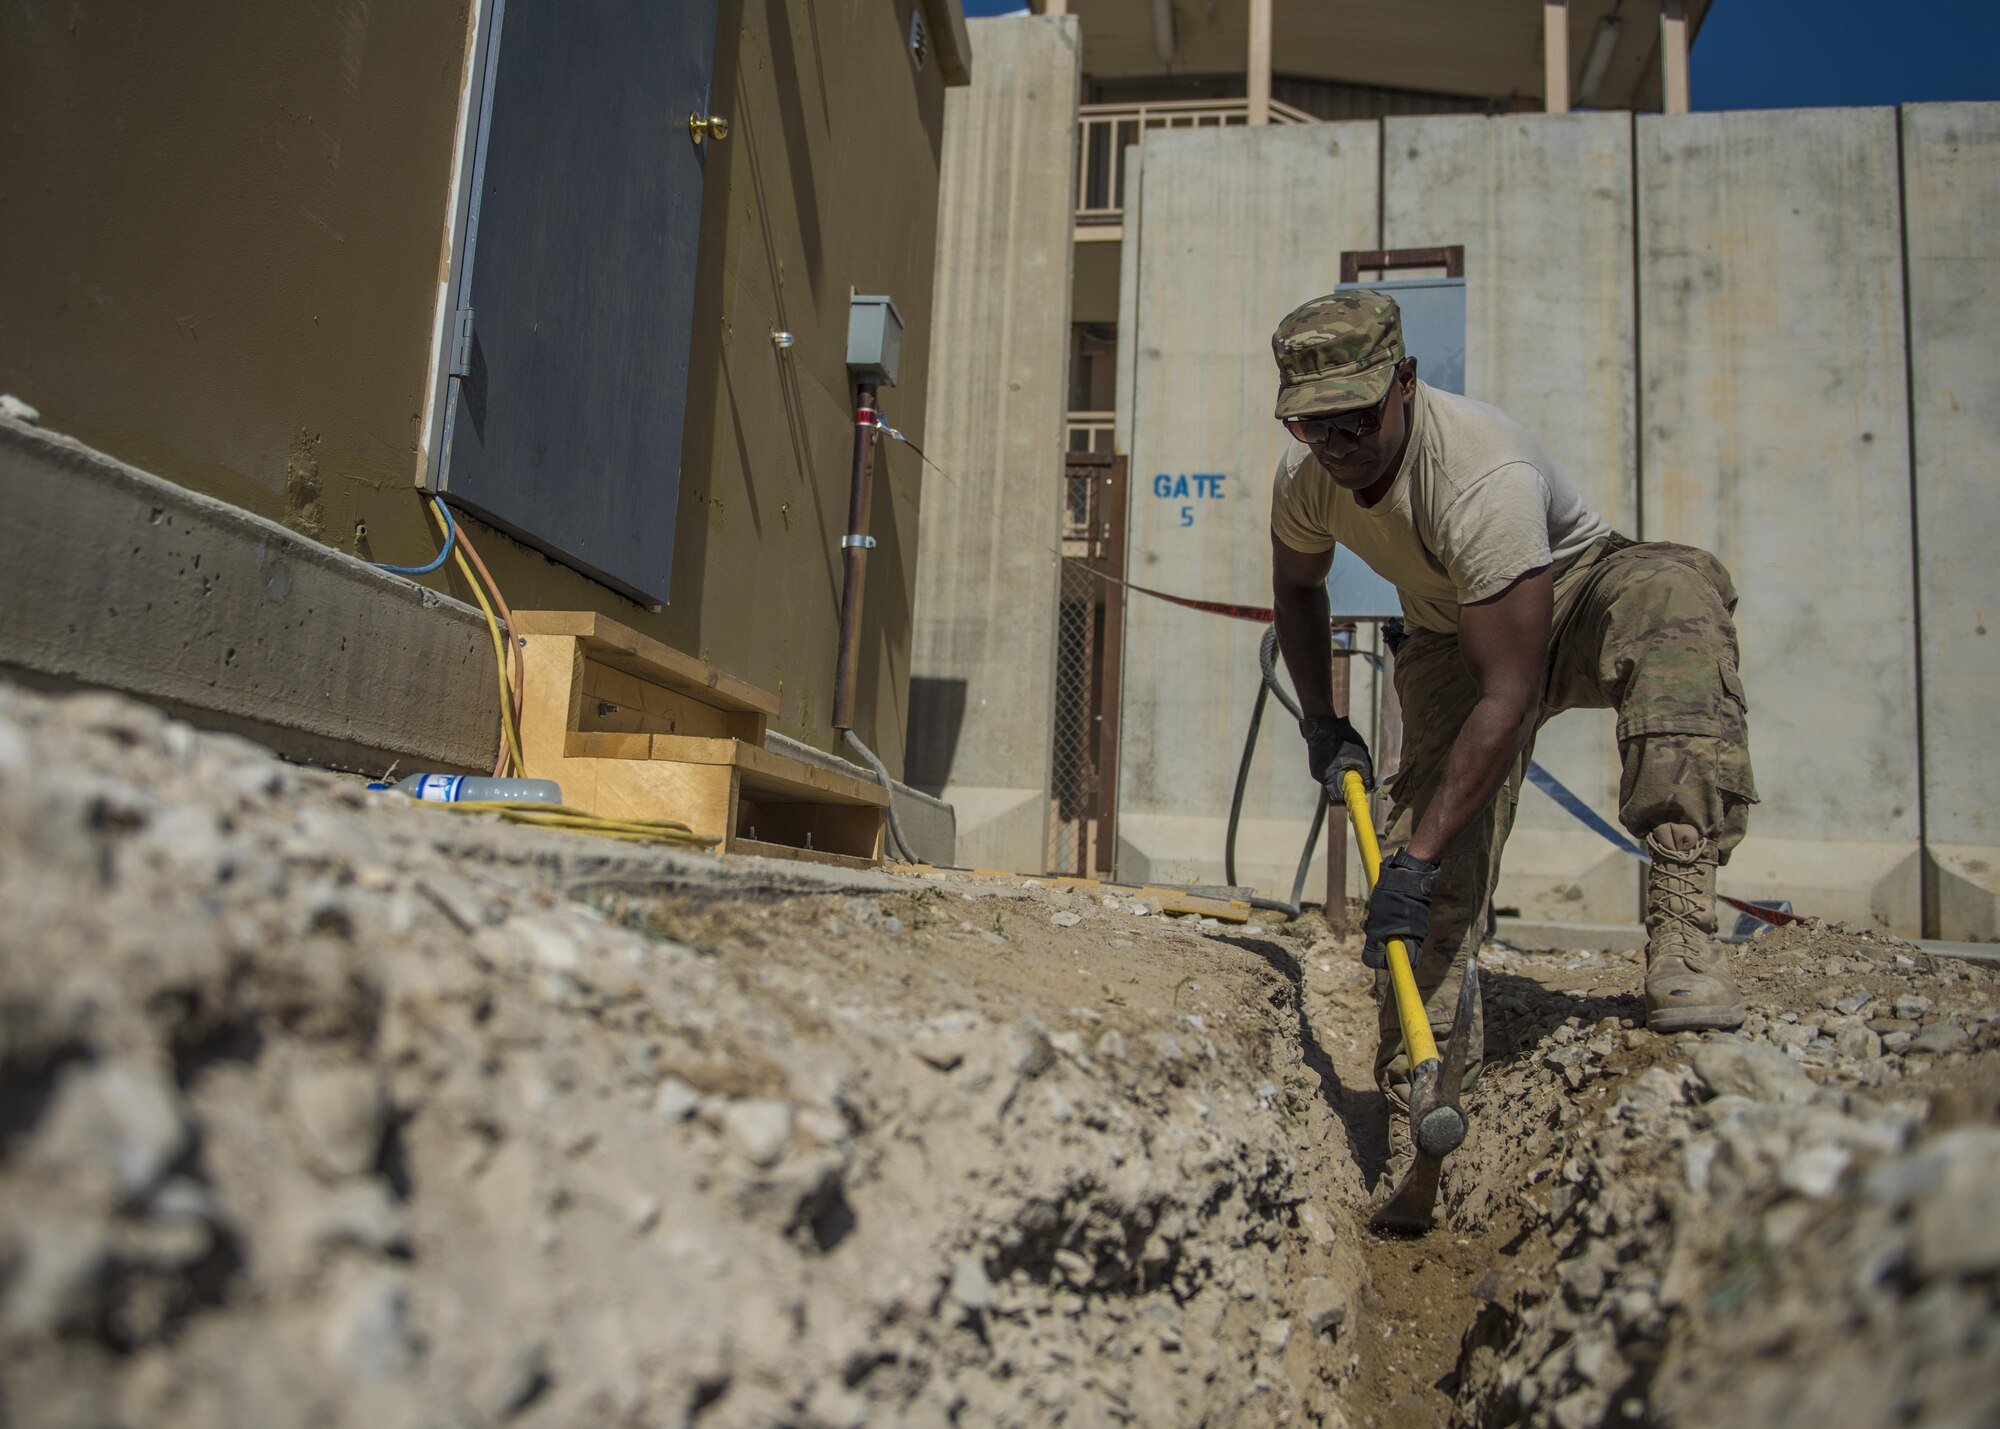 Senior Airman Leon Michael, 455th Expeditionary Civil Engineer Squadron electrical journeyman, uses a pick ax to dig up dirt, Bagram Airfield, Afghanistan, Aug. 31, 2016. The ECES electricians laid service wire to provide electricity for a new Airman’s Attic and ministry center. (U.S. Air Force photo by Senior Airman Justyn M. Freeman)